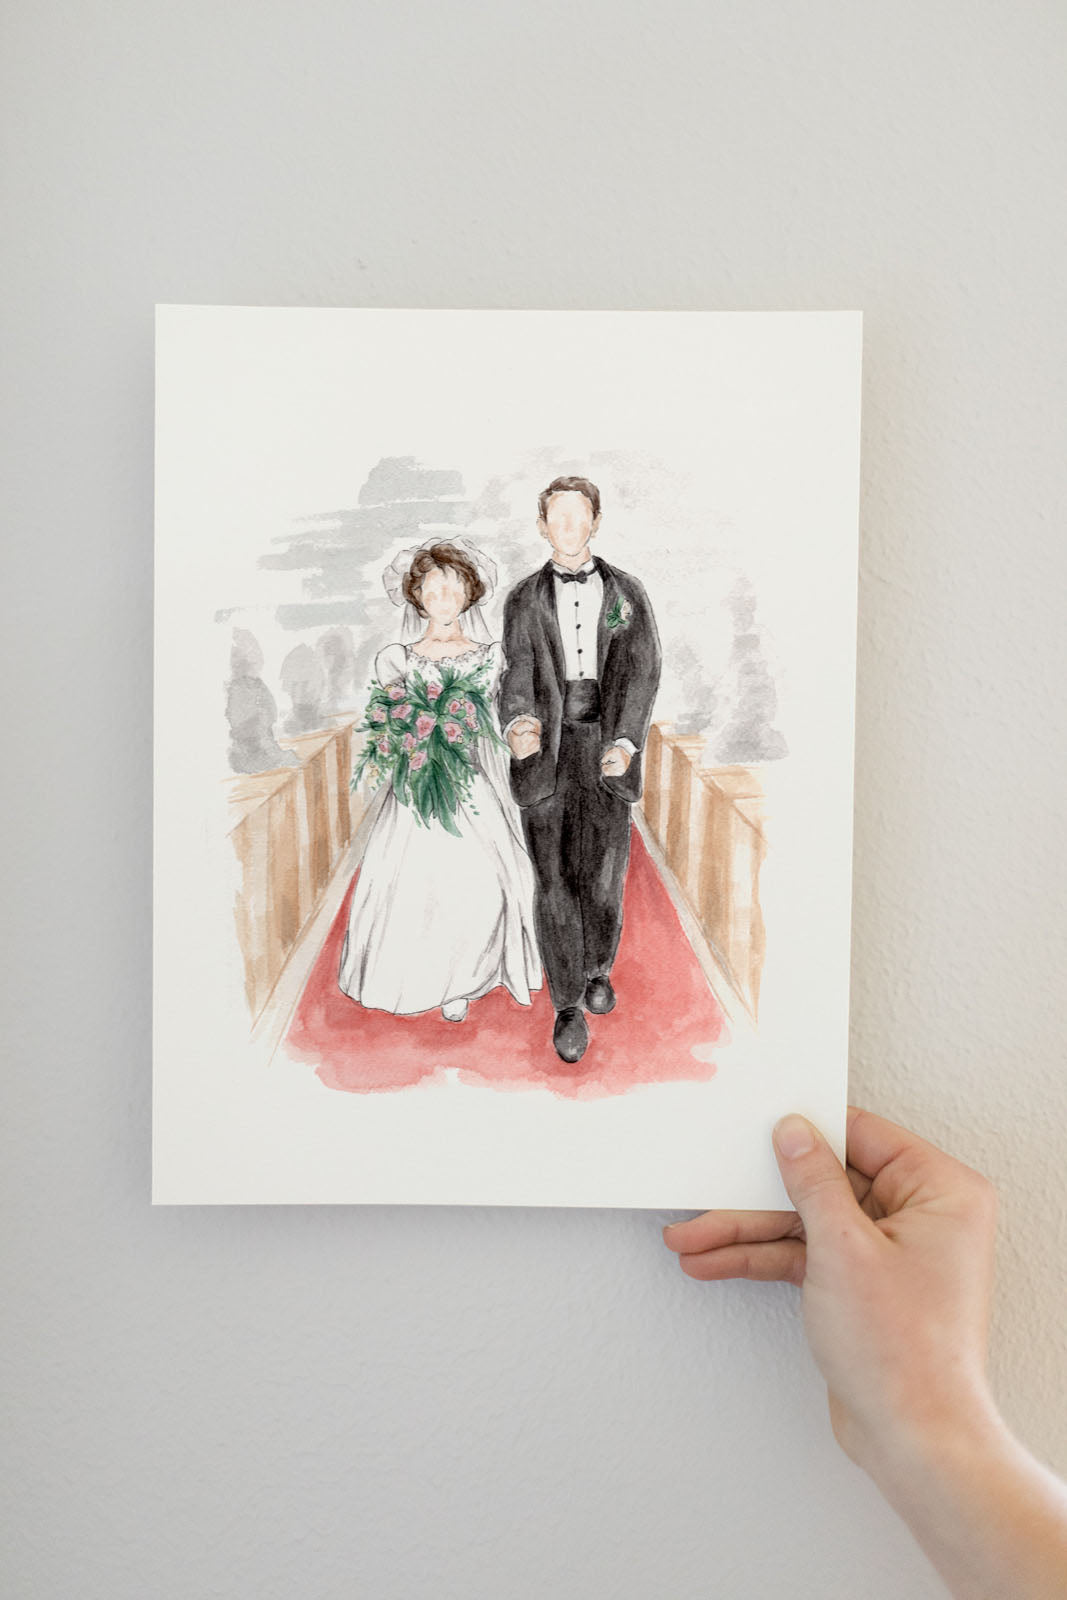 Watercolor wedding portrait gift for bride and groom on 10th anniversary, painting of walking down the aisle in church, bride in long white gown and groom in tuxedo | Custom Watercolor Wedding Invitations, Dallas, Texas | By Caroline Ann